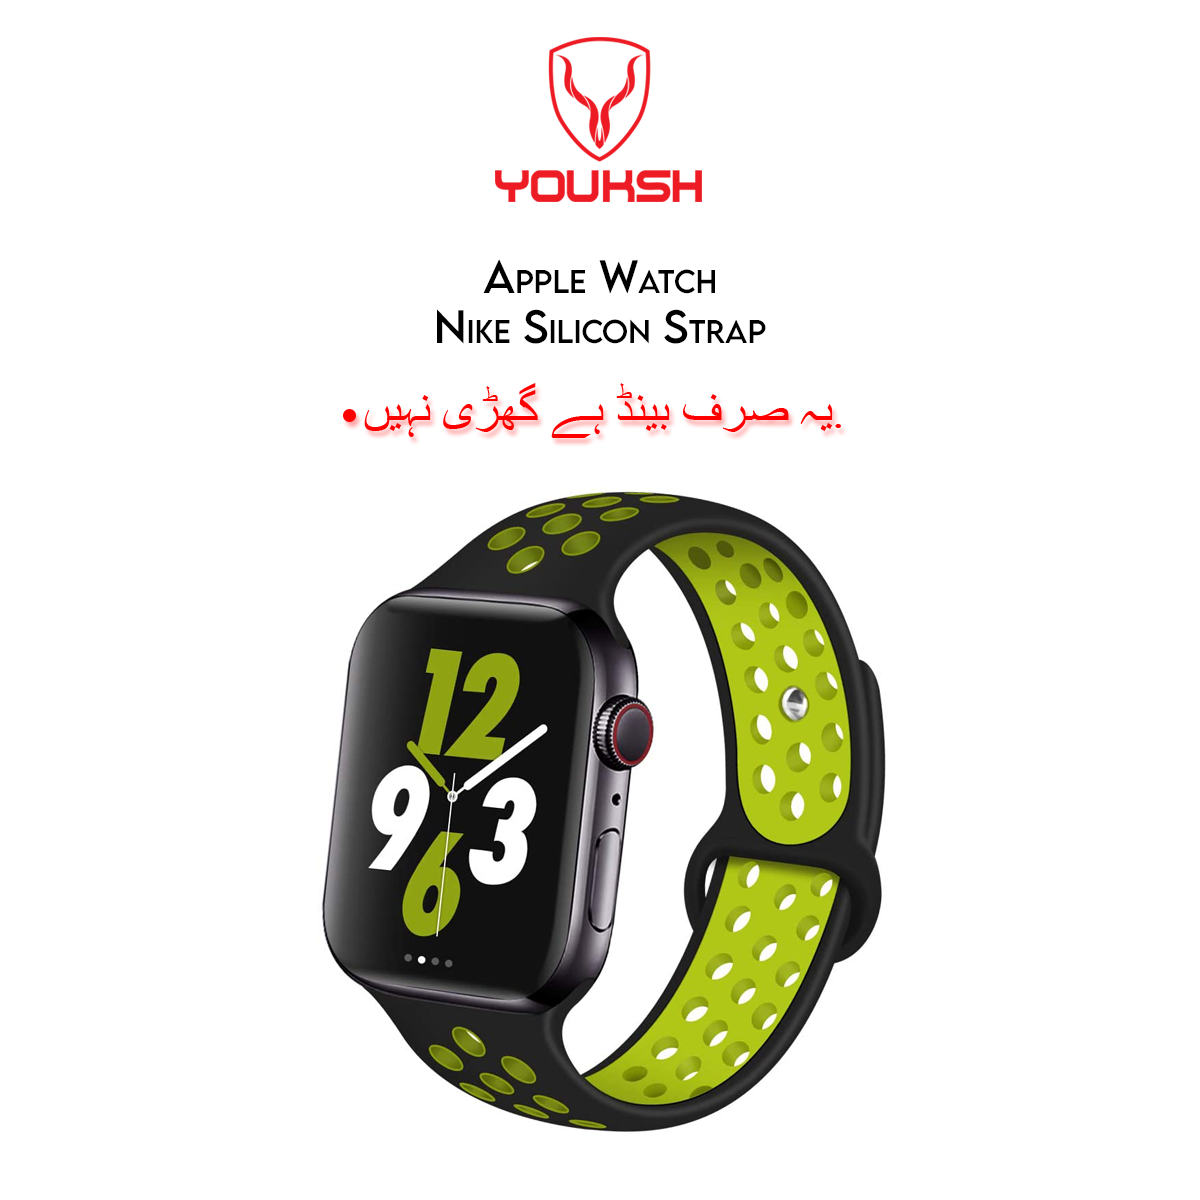 YOUKSH - Apple Watch 38mm/40mm Sports Silicone Strap - 38mm/40mm Sports Silicone Band Strap - For Apple Watch Series - 1/2/3/4/5/6.